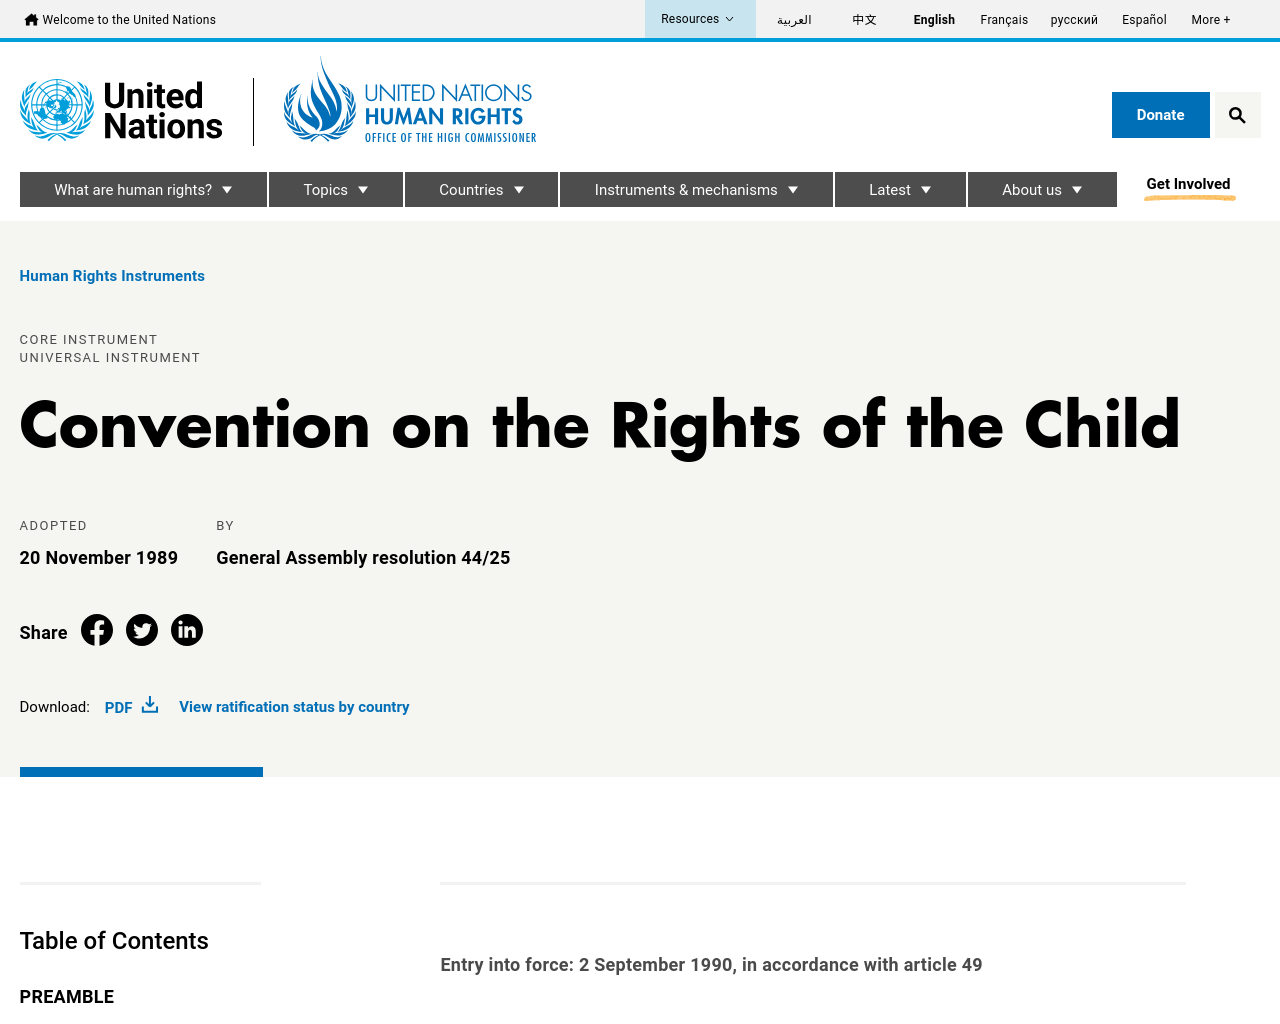 Convention on the Rights of the Child - Full Text